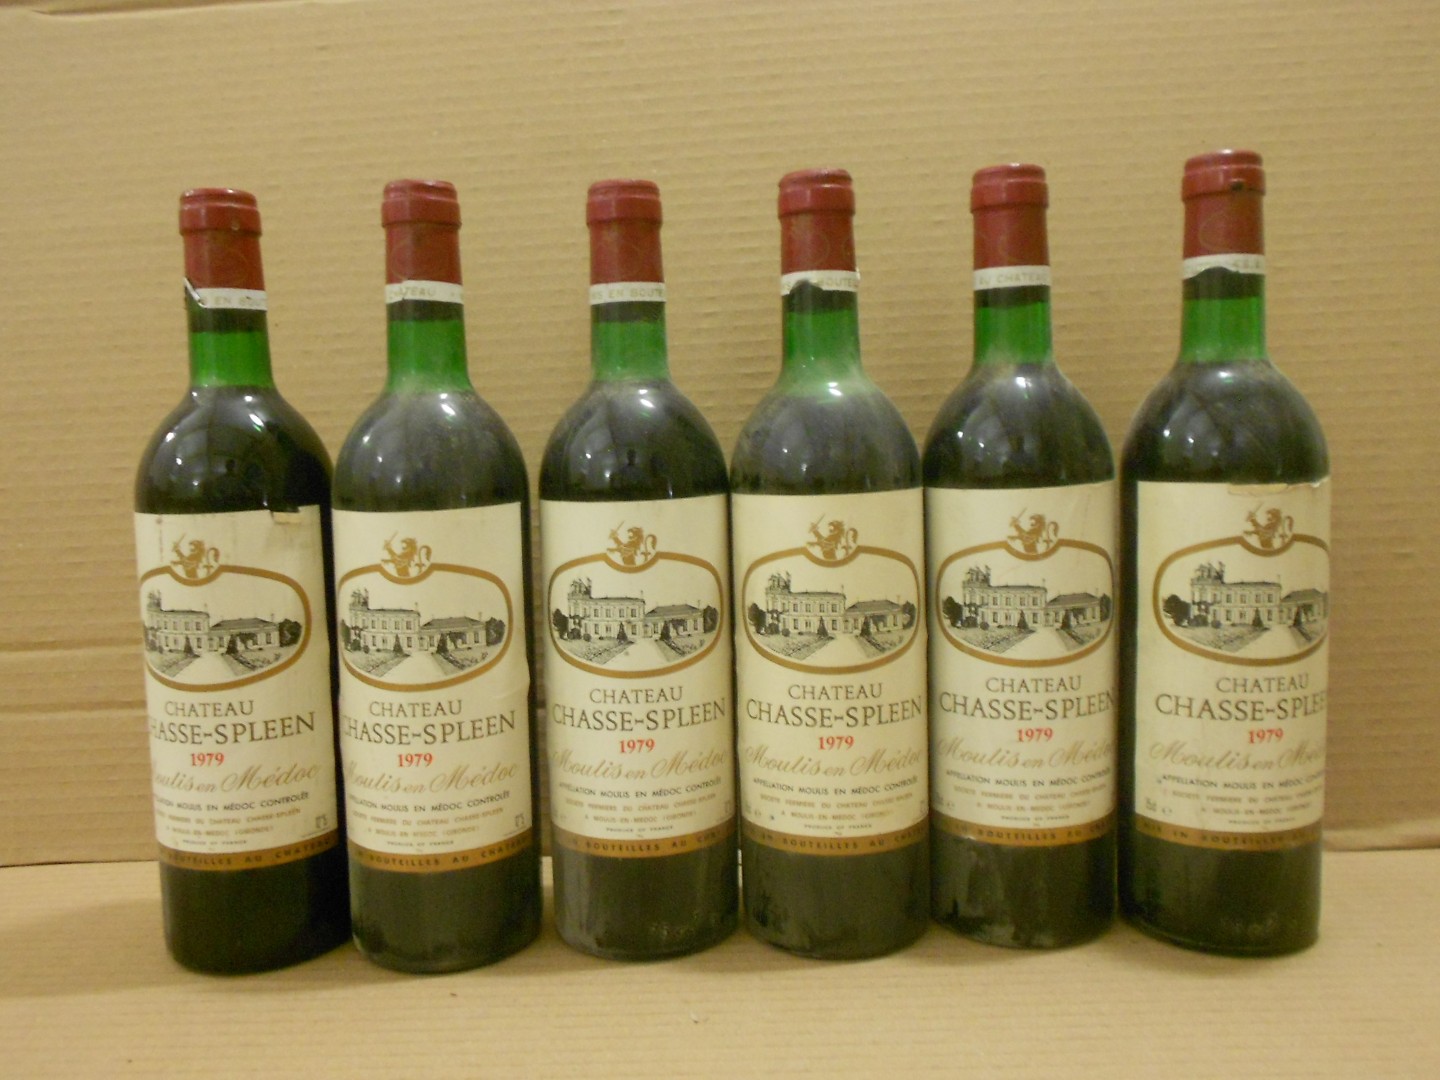 Chateau Chasse Spleen, Moulis en Medoc 1979, twelve bottles. Removed from a college cellar